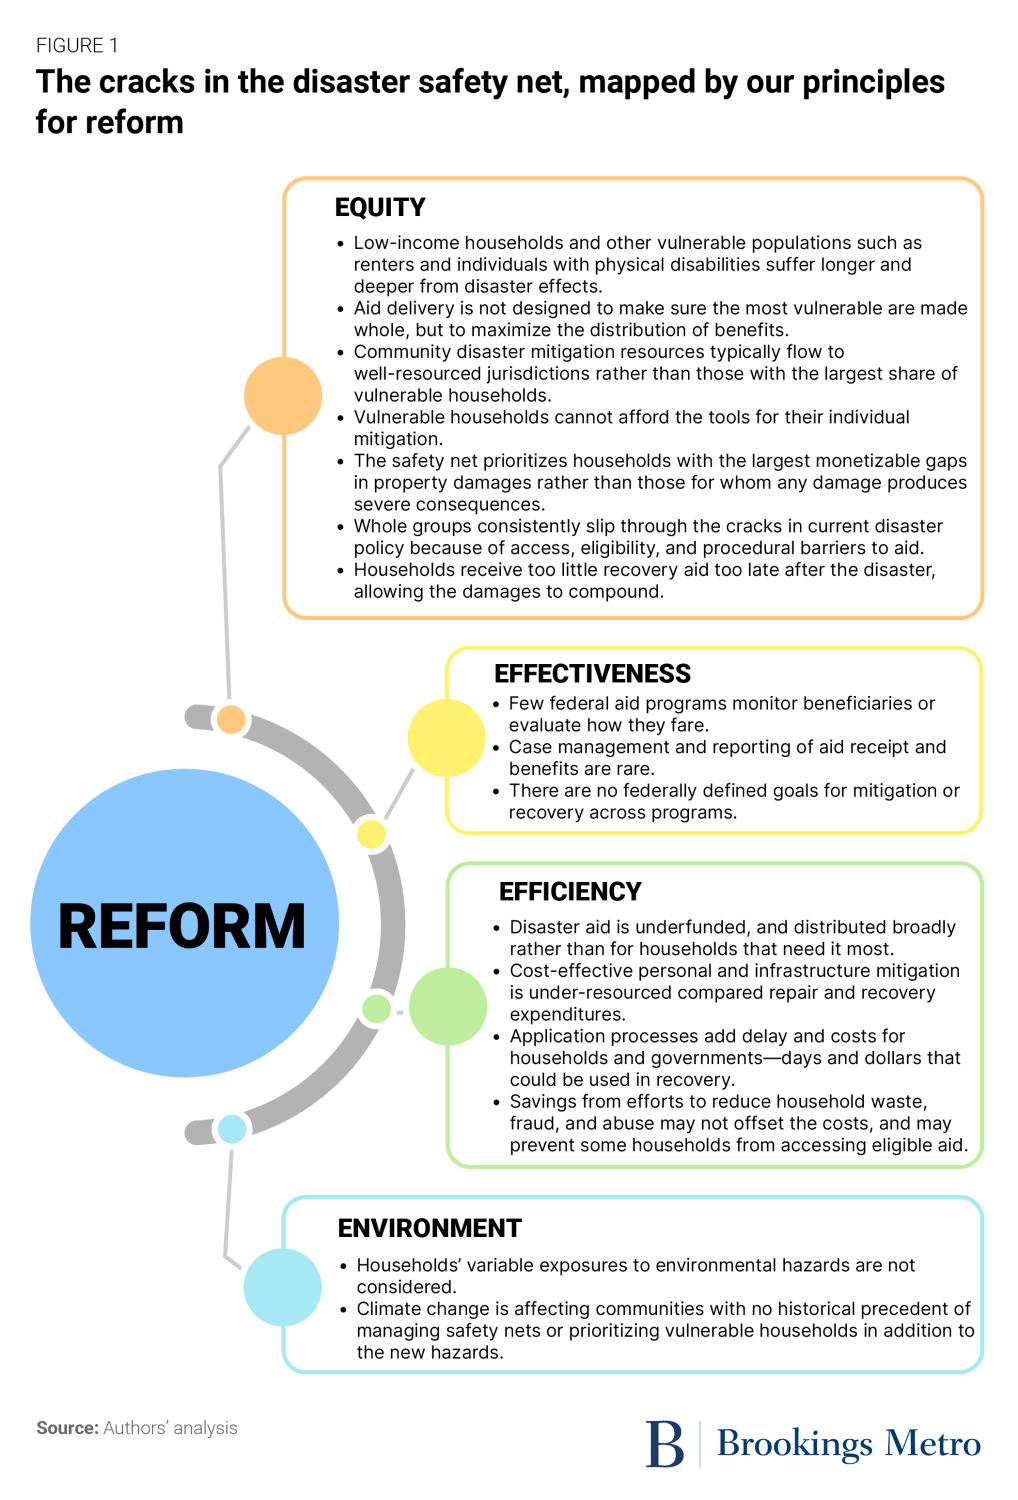 Figure 1. The cracks in the disaster safety net, mapped by our principles for reform